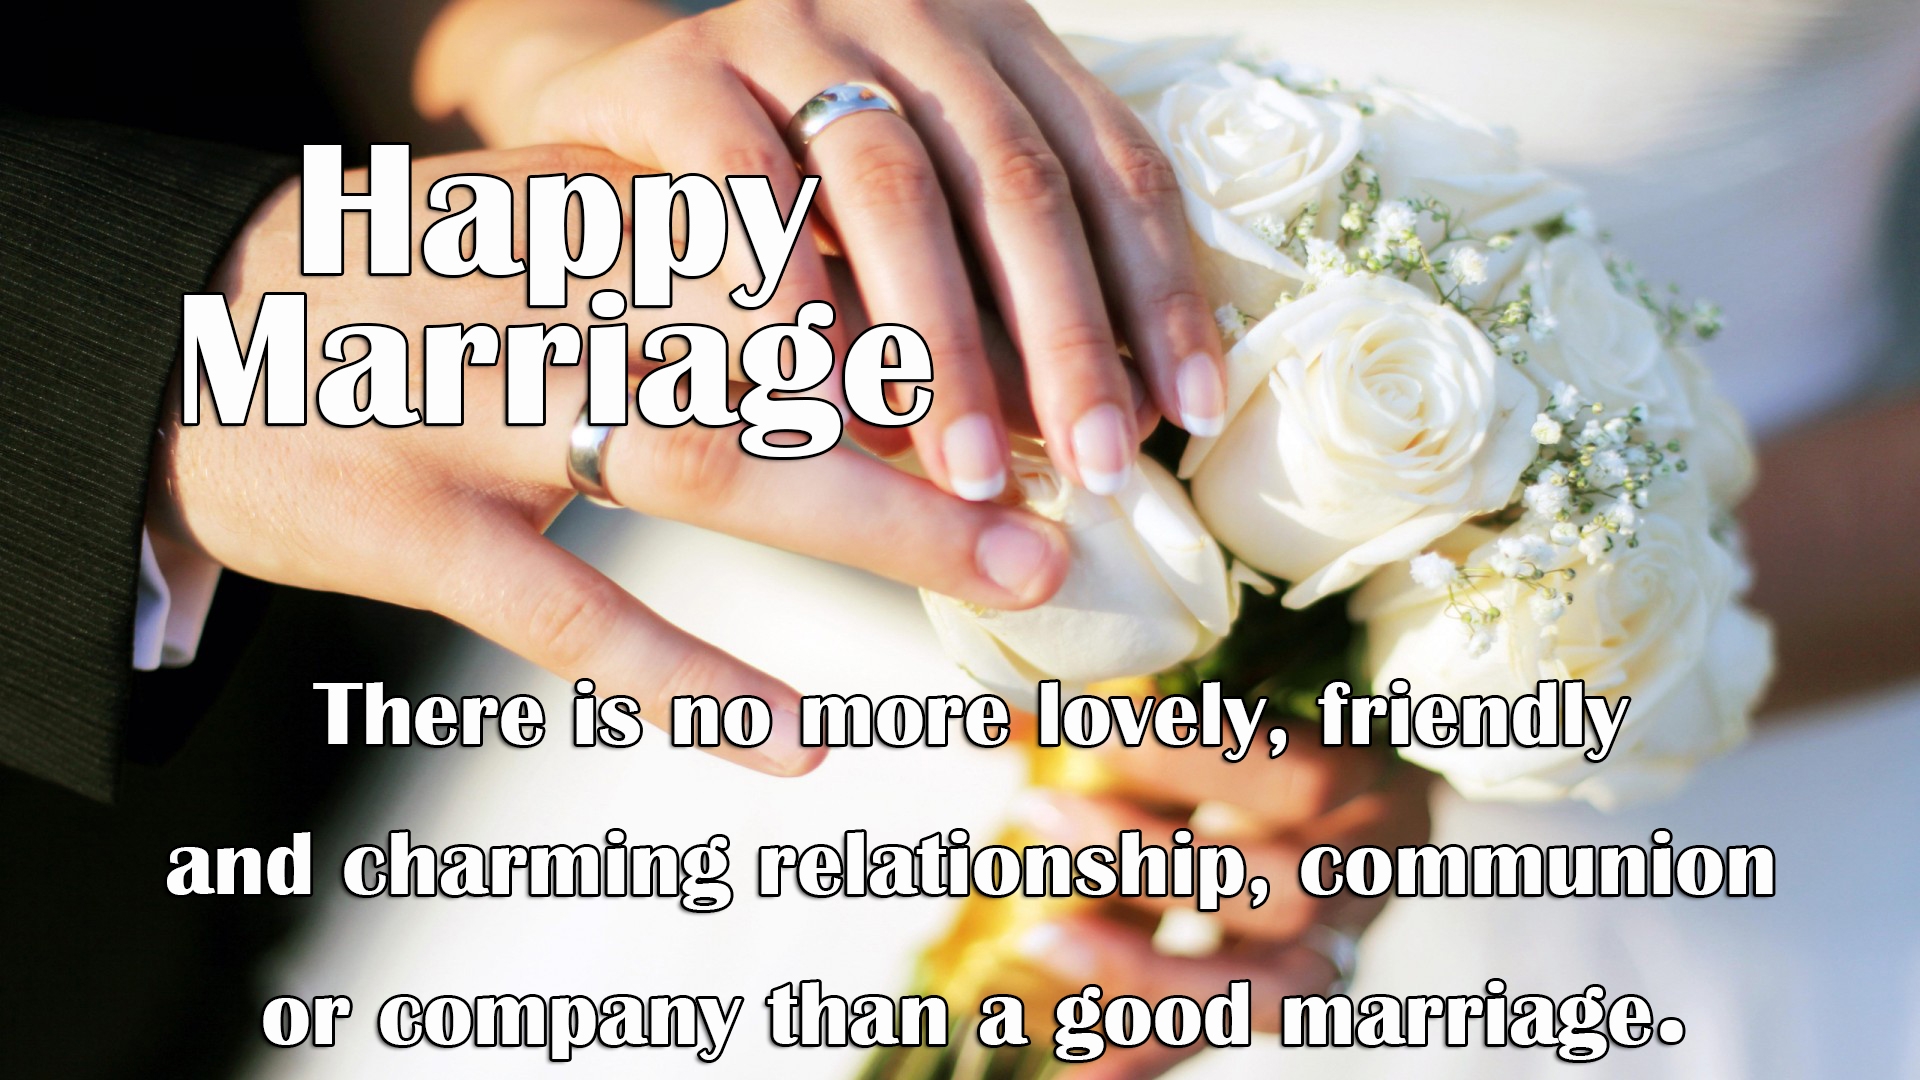 Happy Marriage Quotes - Marriage Wallpapers With Quotes - HD Wallpaper 